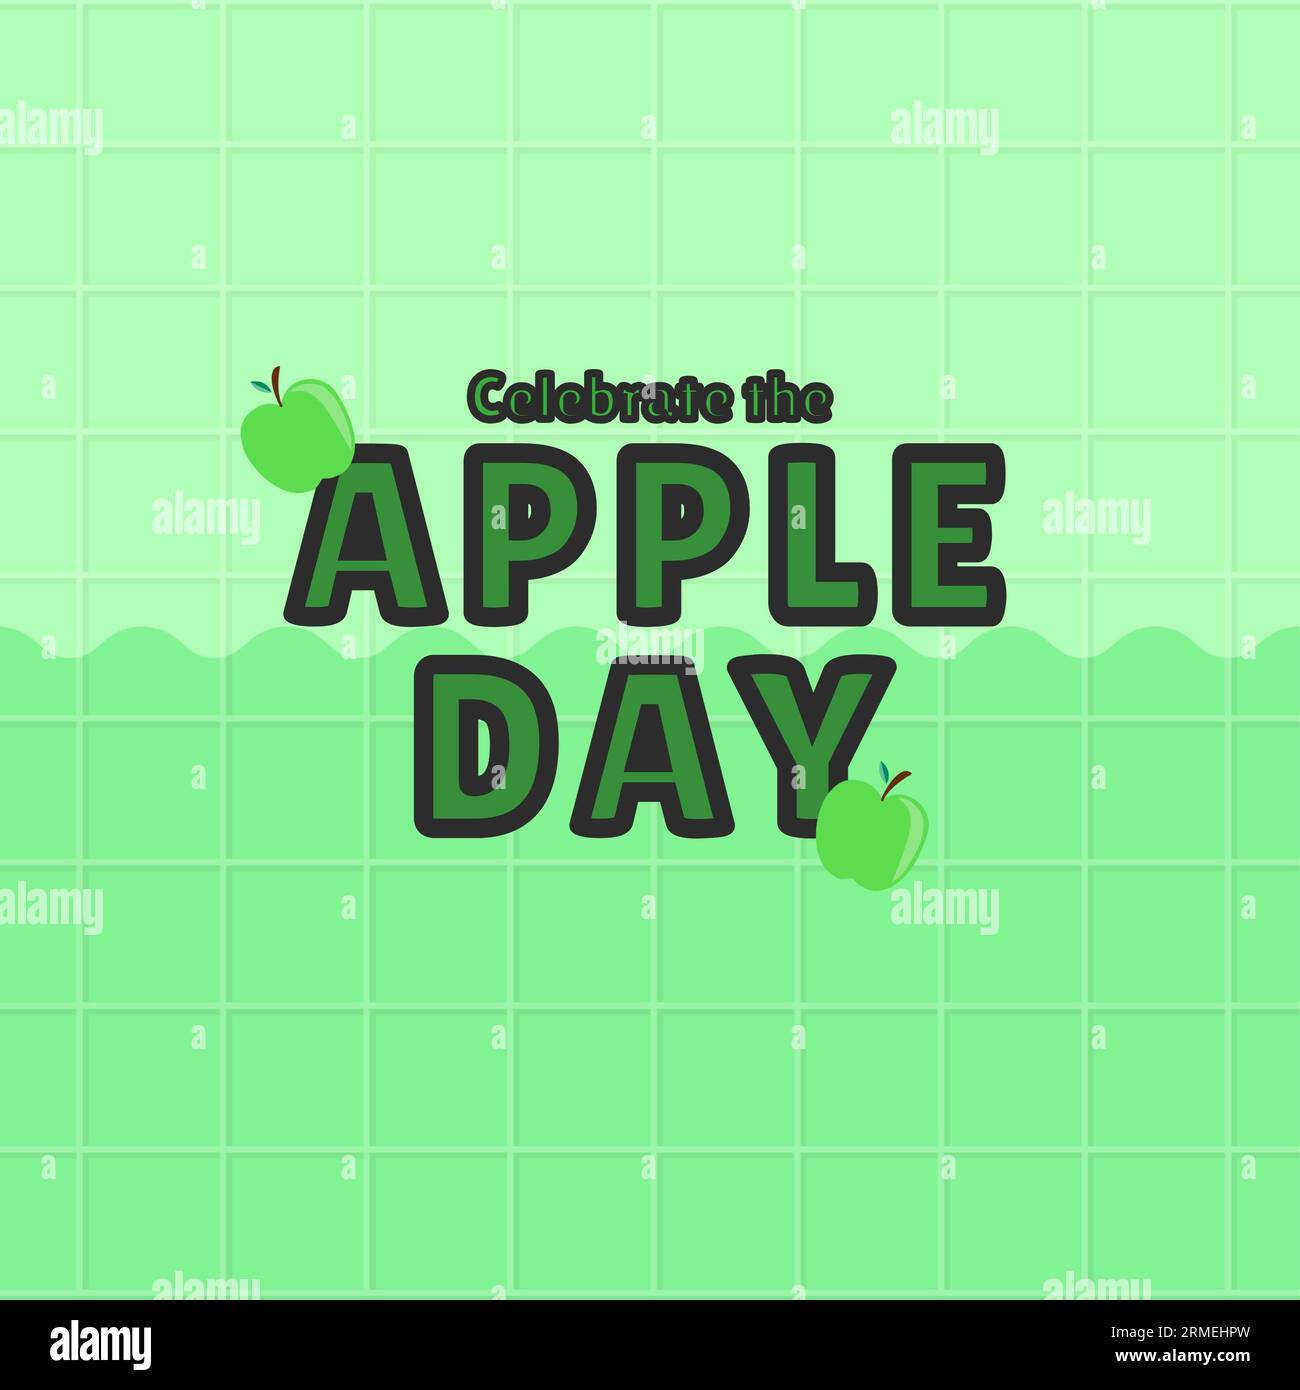 Illustration of celebrate the apple day text and granny smith apples on green grid background Stock Photo